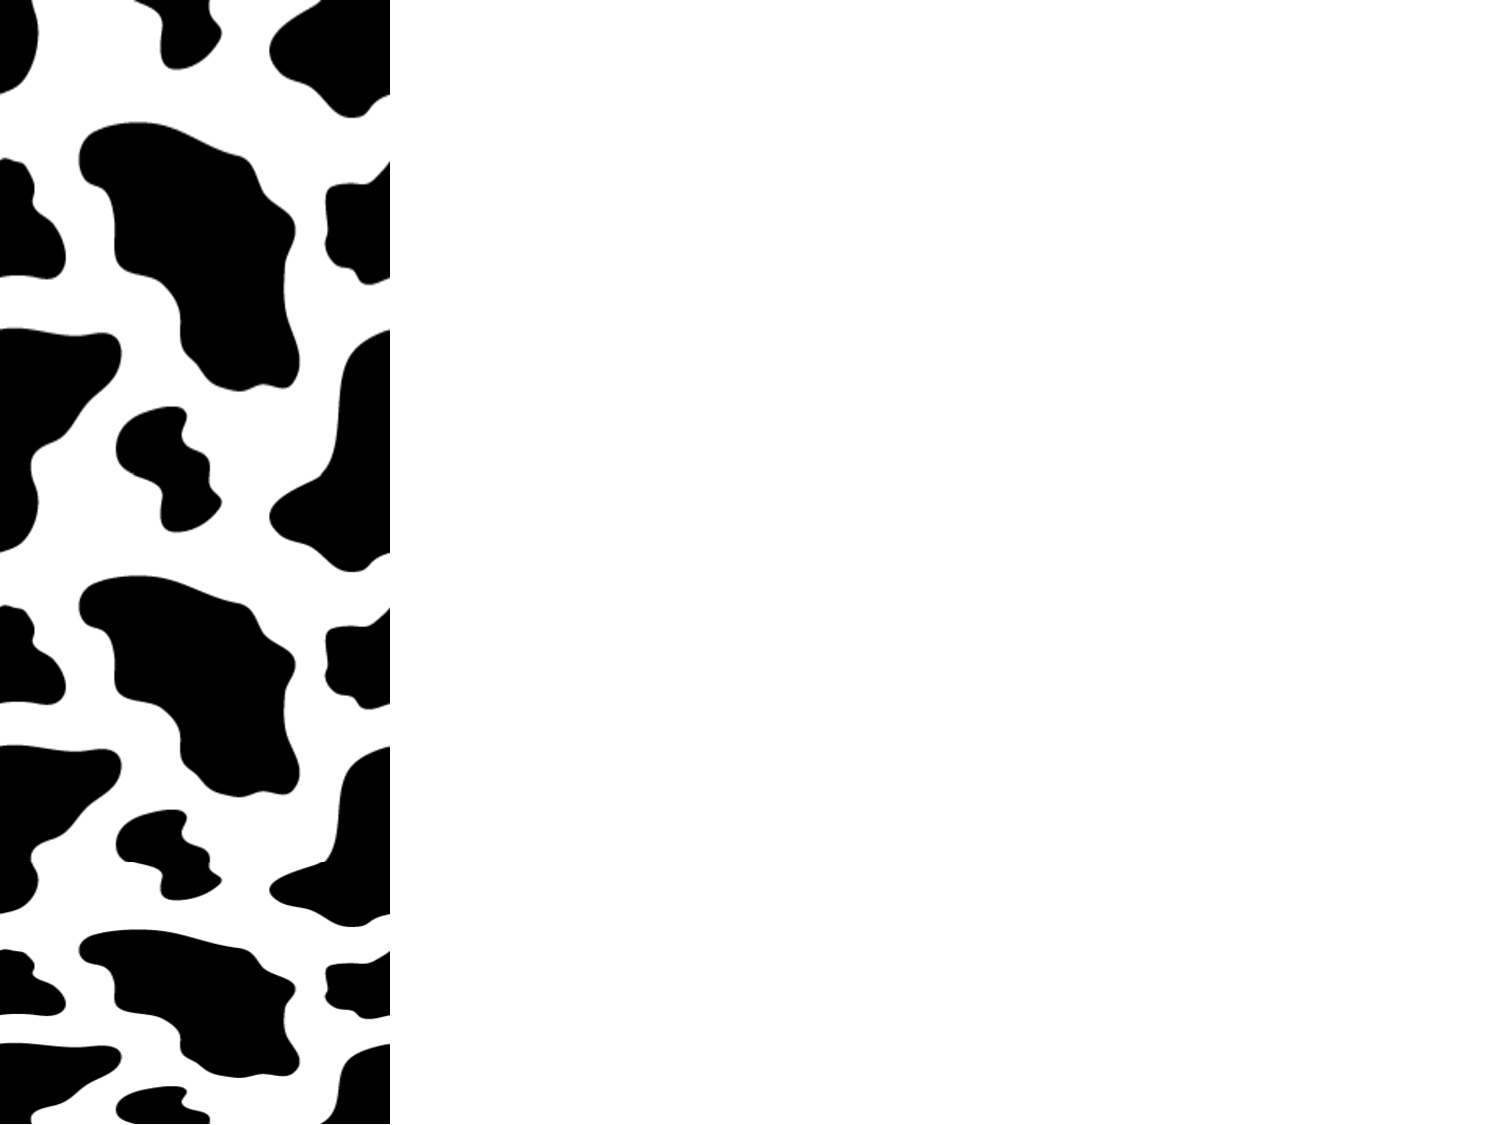 Free Powerpoint Templates - Cowprint Side Border - ClipArt Best ...